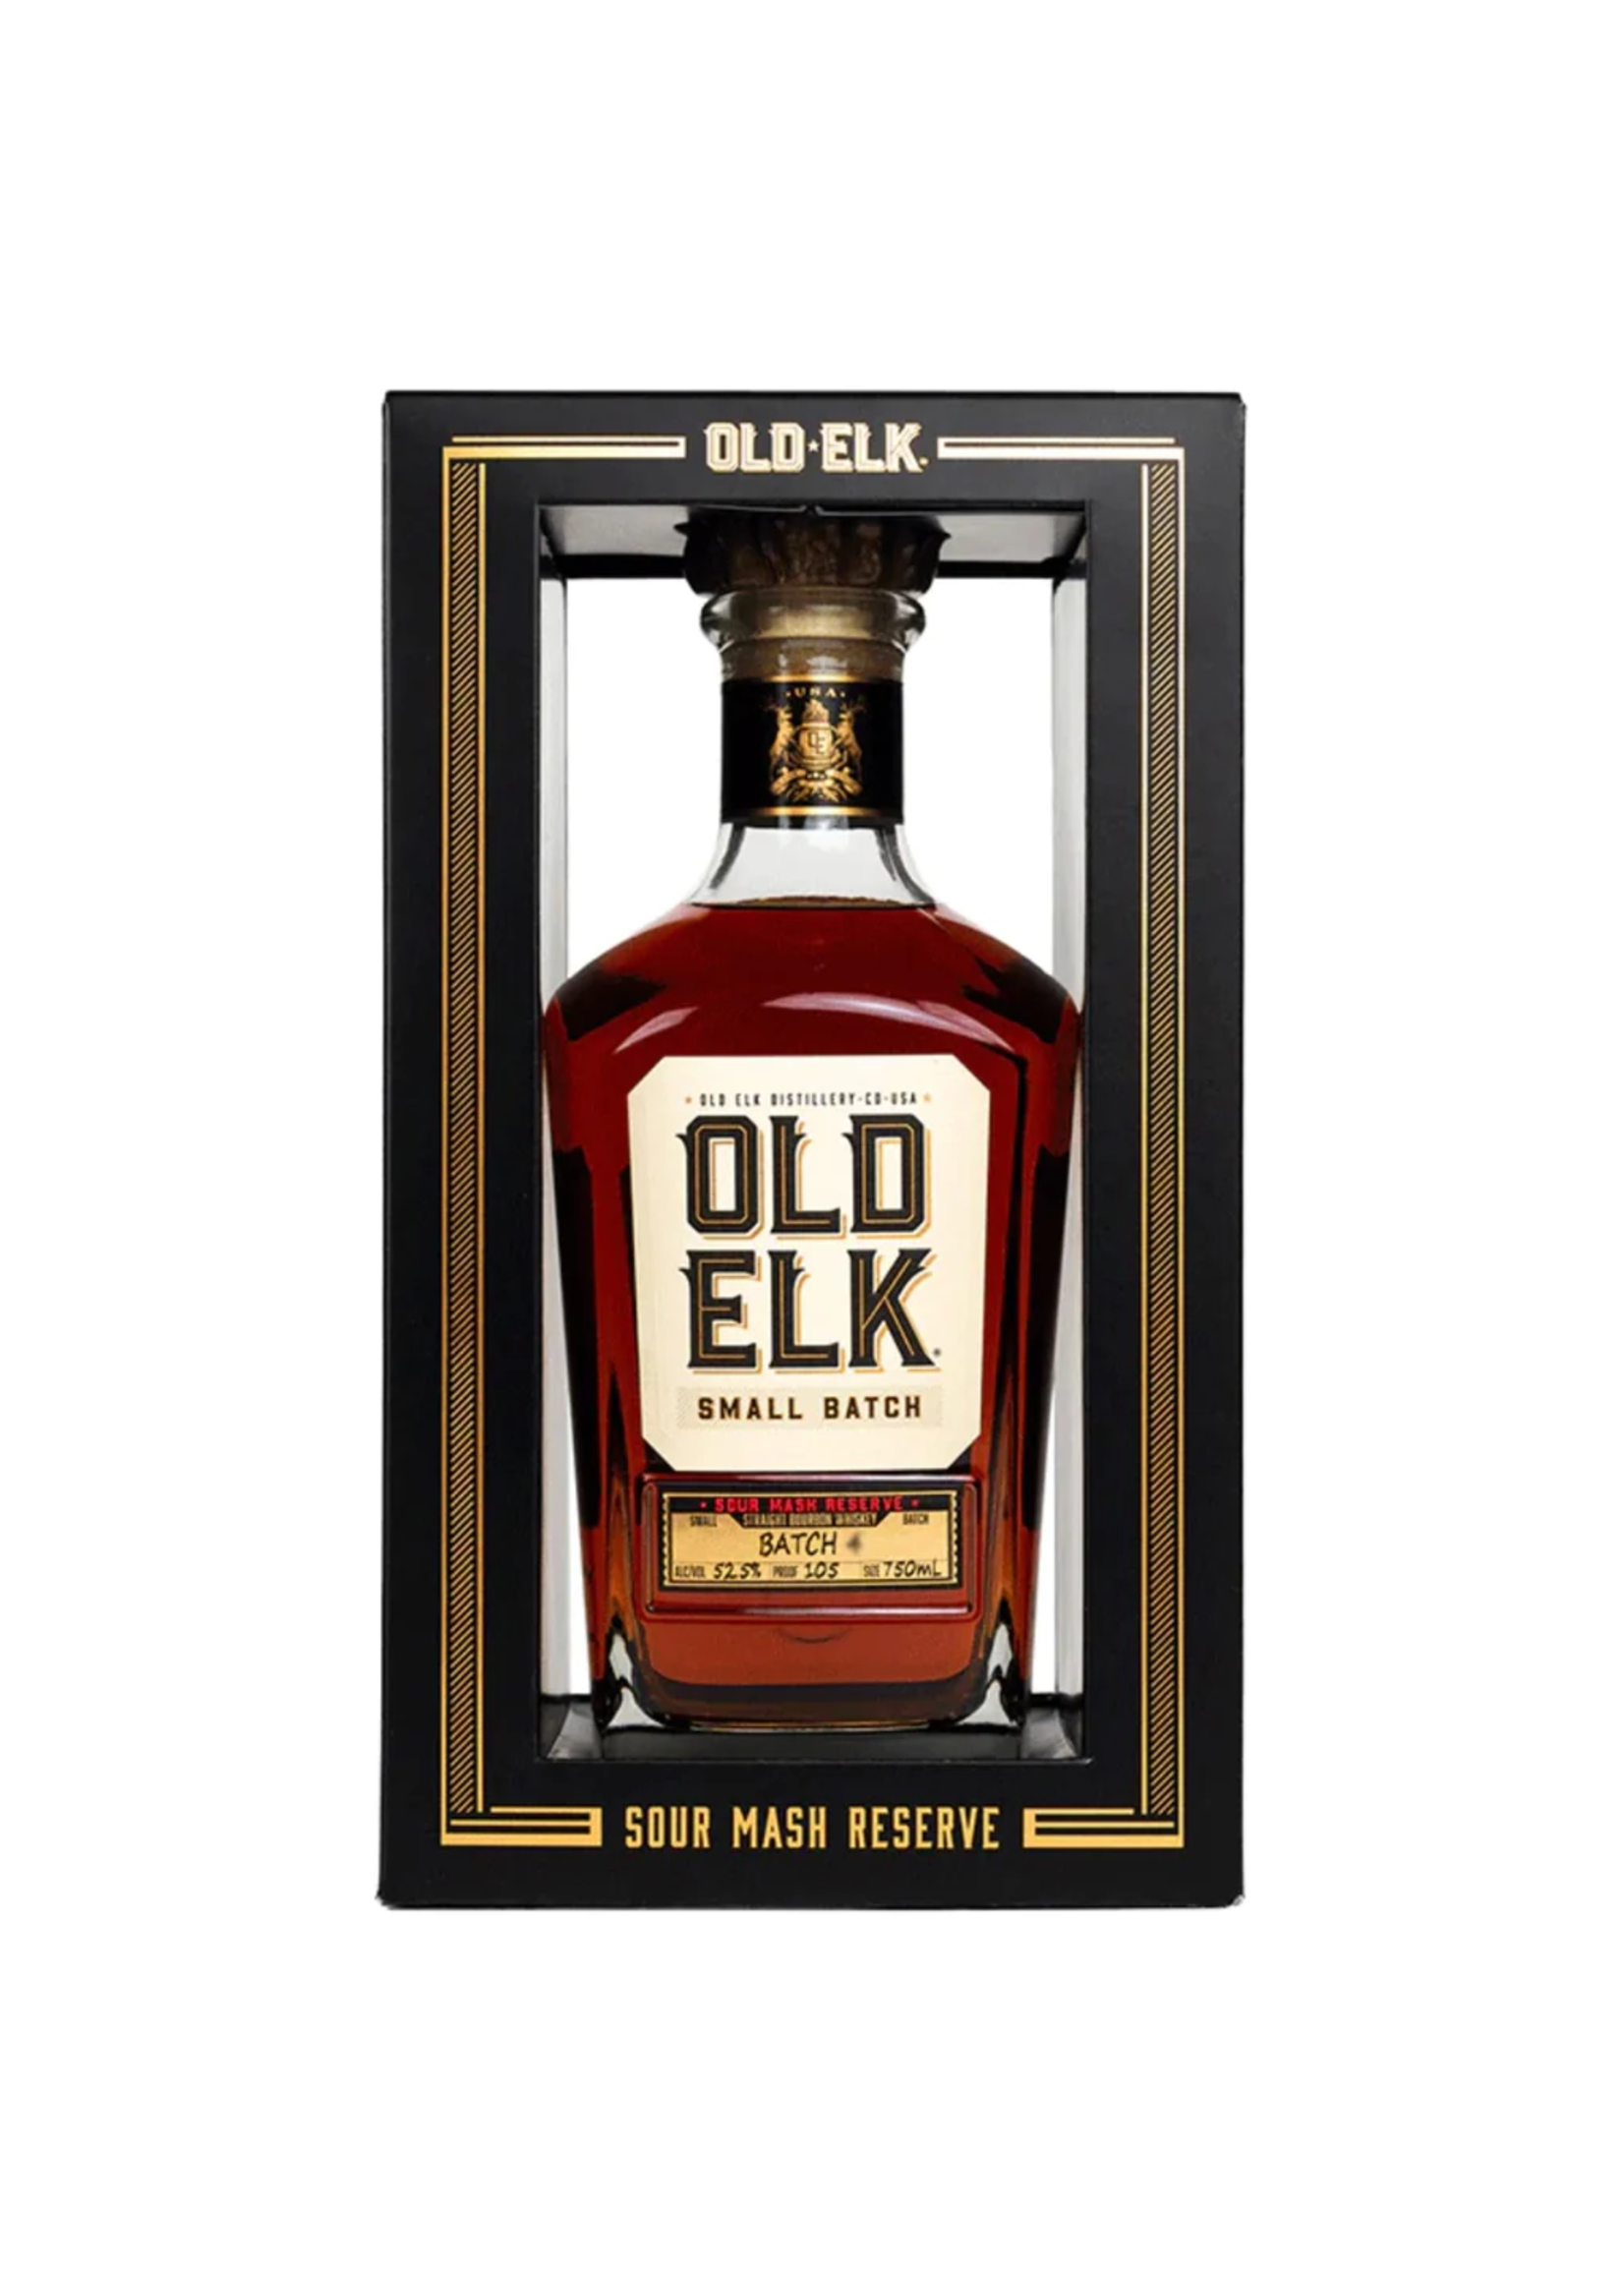 Old Elk Old Elk Straight Bourbon Sour Mash Reserve Small Batch 6 Year 105Proof 750ml